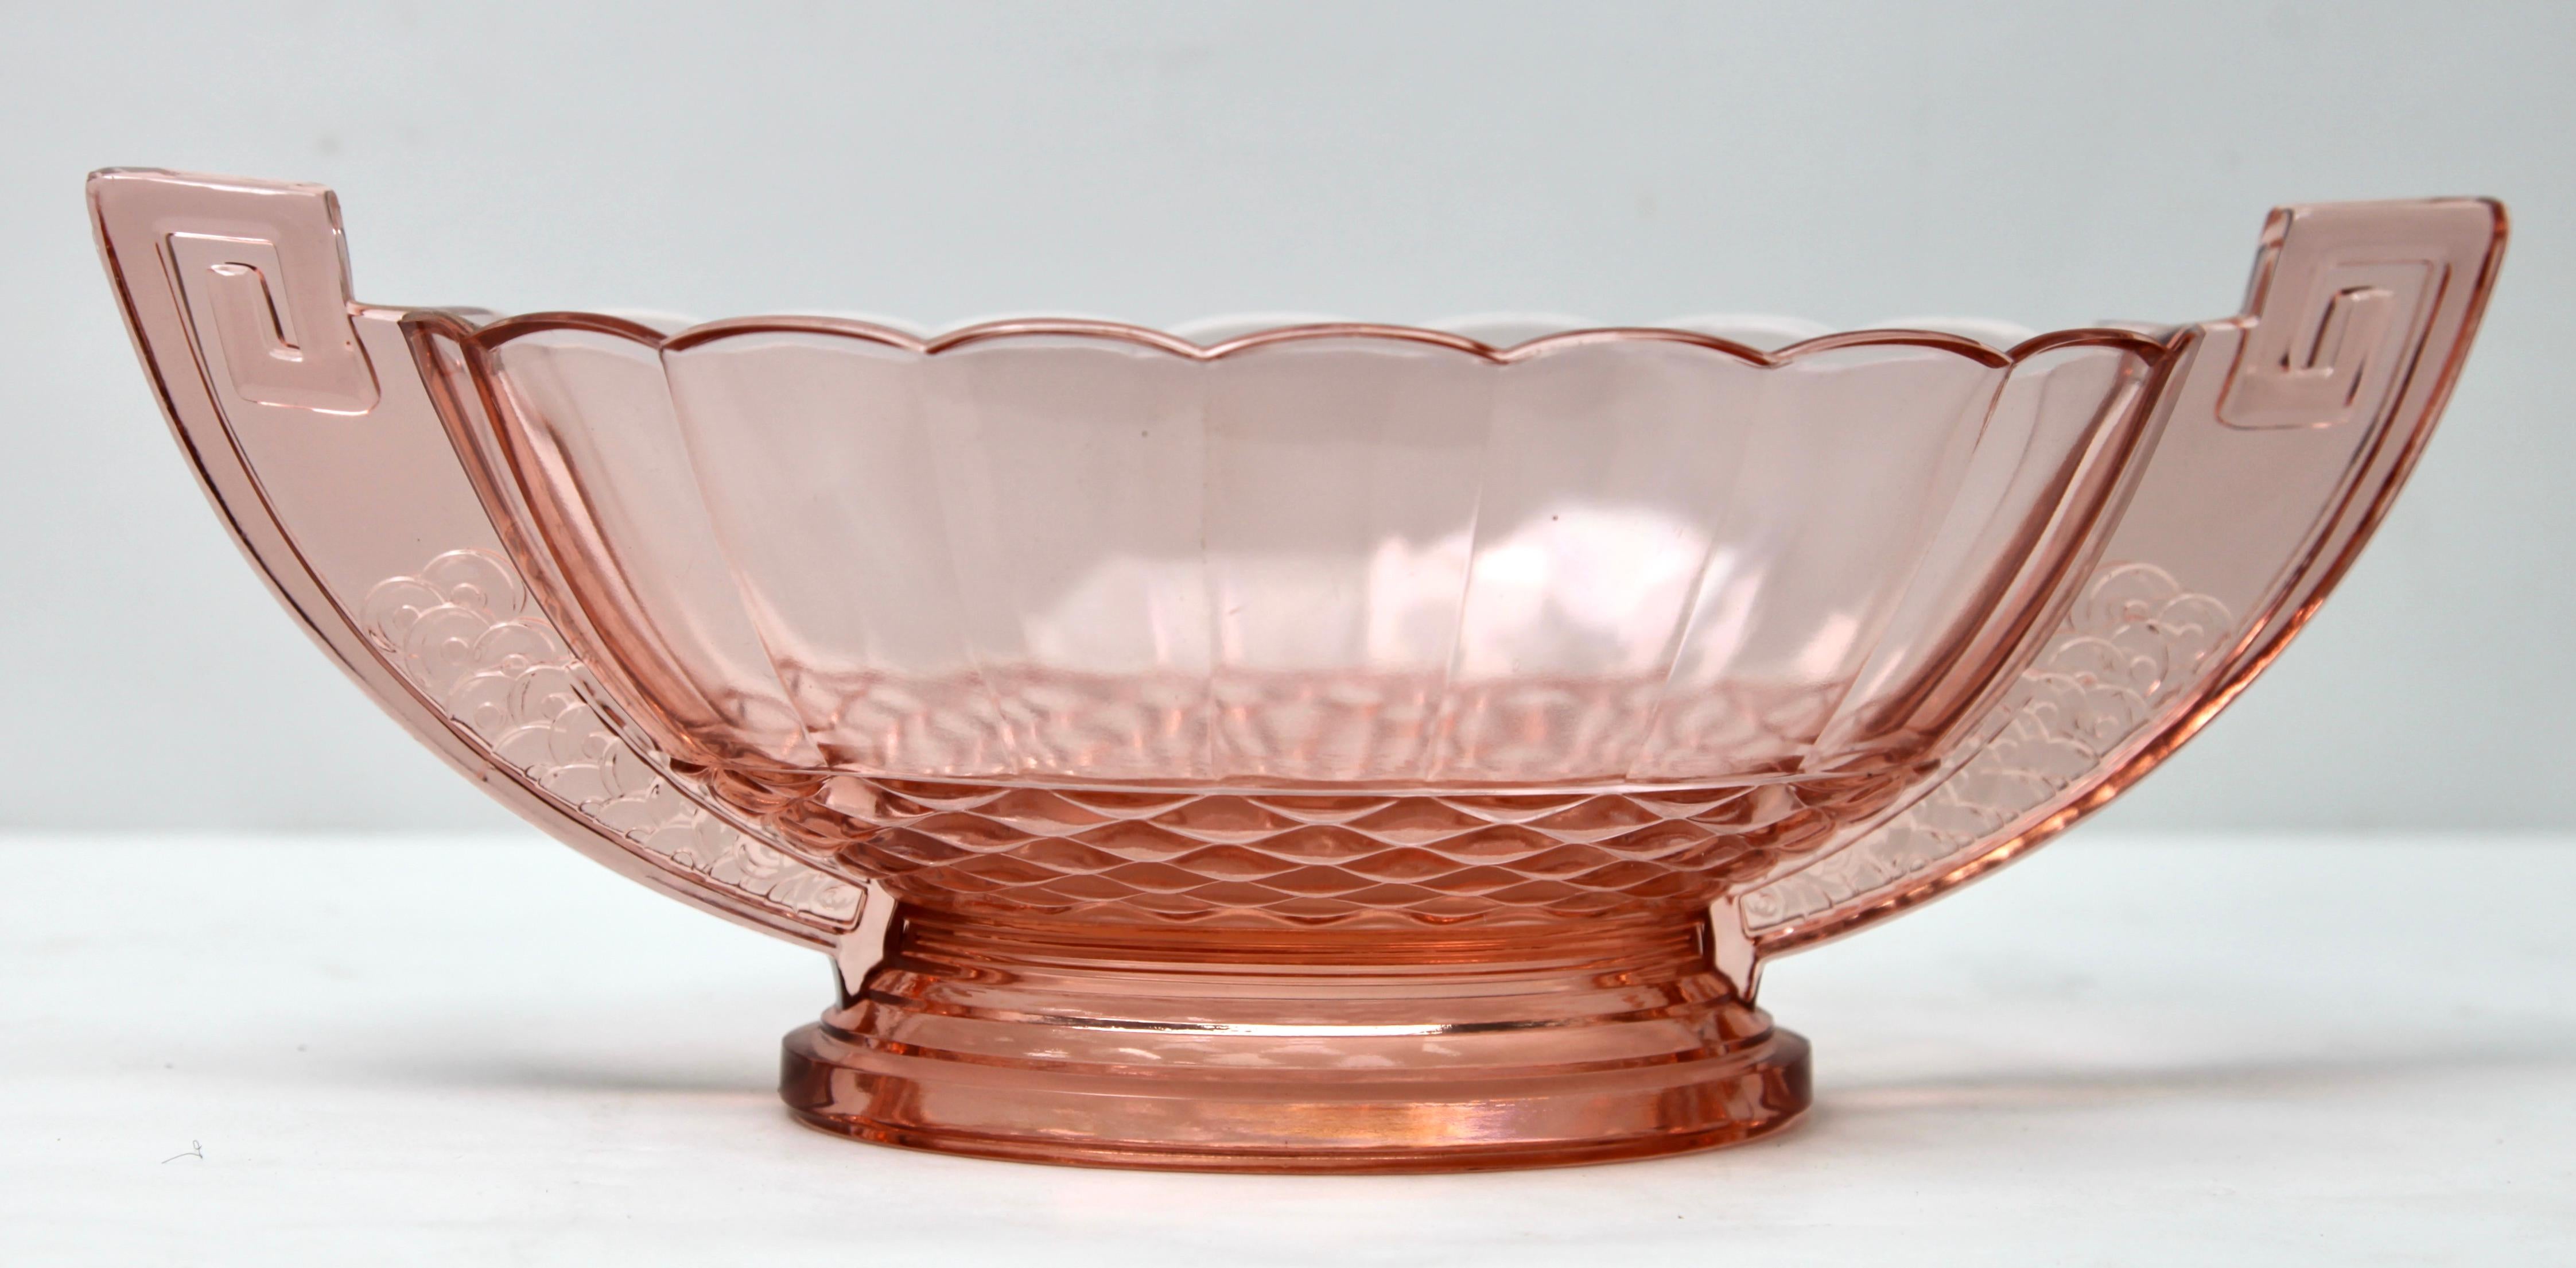 The version of this bowl design in glass, made by Val Saint Lambert for their Luxval series. The vase is marked on the inside: 